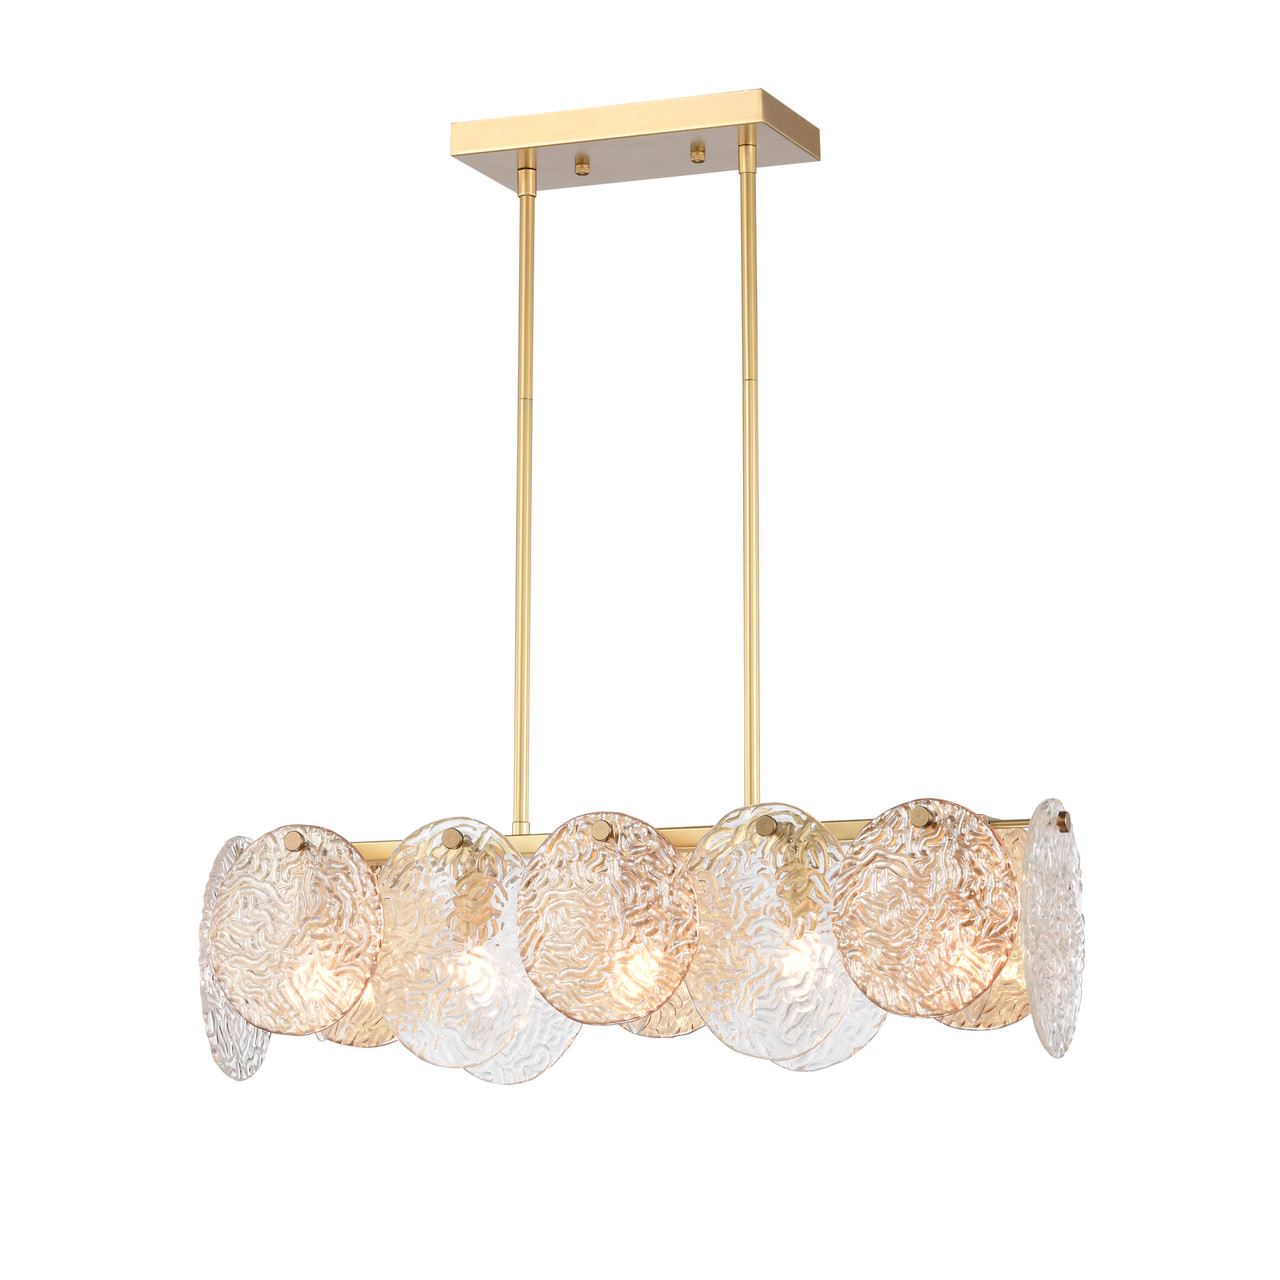 WAREHOUSE OF TIFFANY'S GD01-35MG Gavin 24.6 in. 5-Light Indoor Gold Finish Chandelier with Light Kit